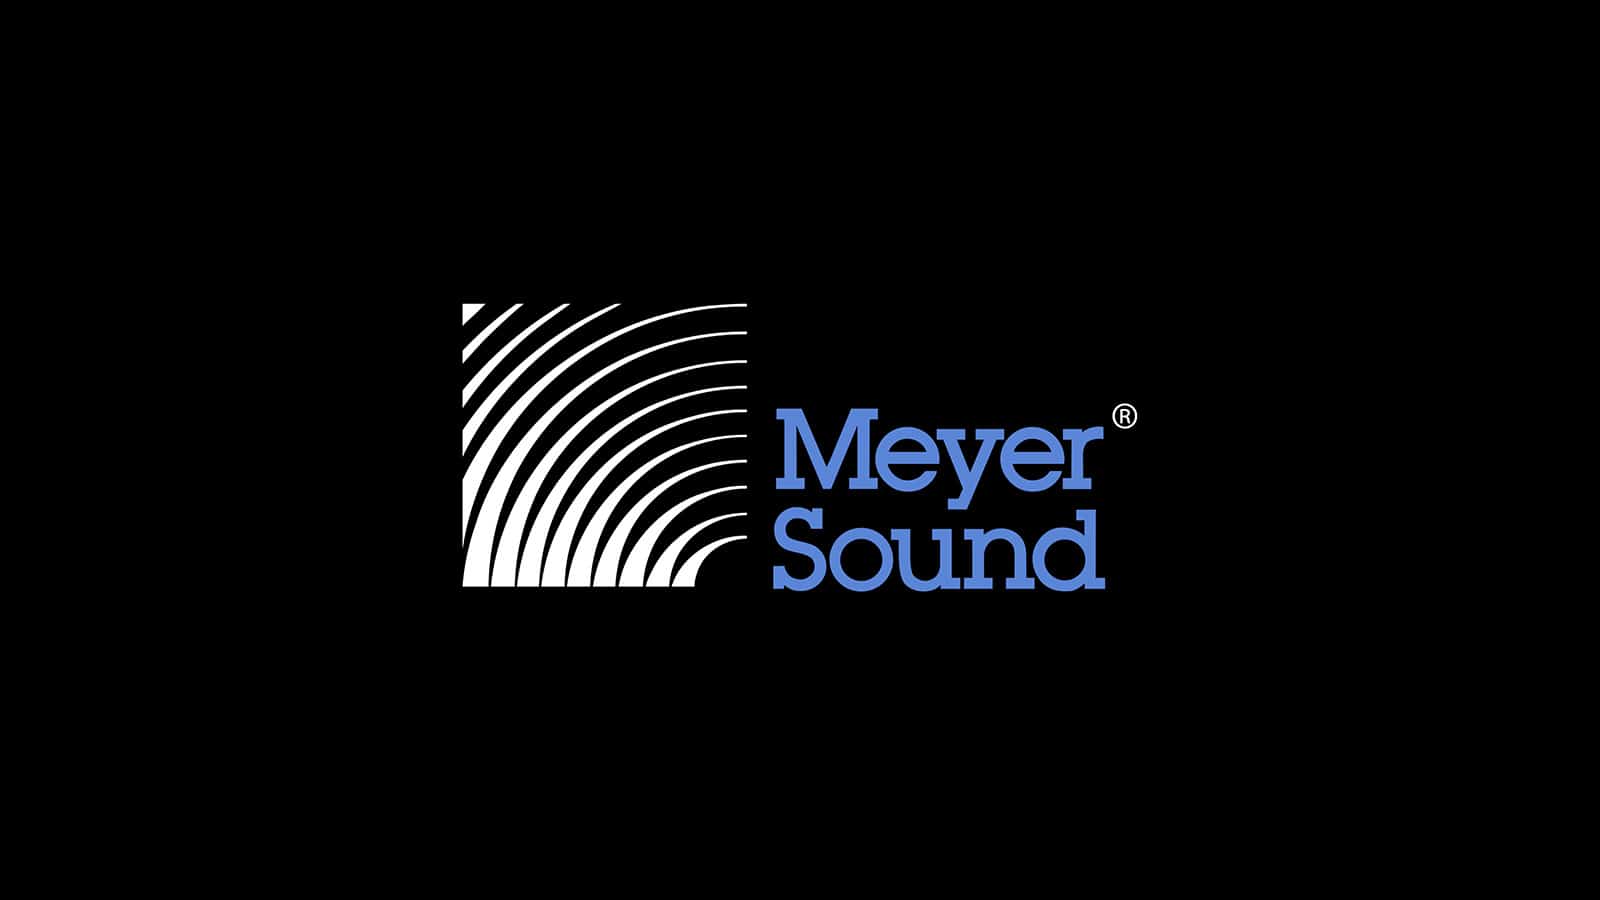 Meyer Sound Announces New Hires in Education, Tech Services, and Sales